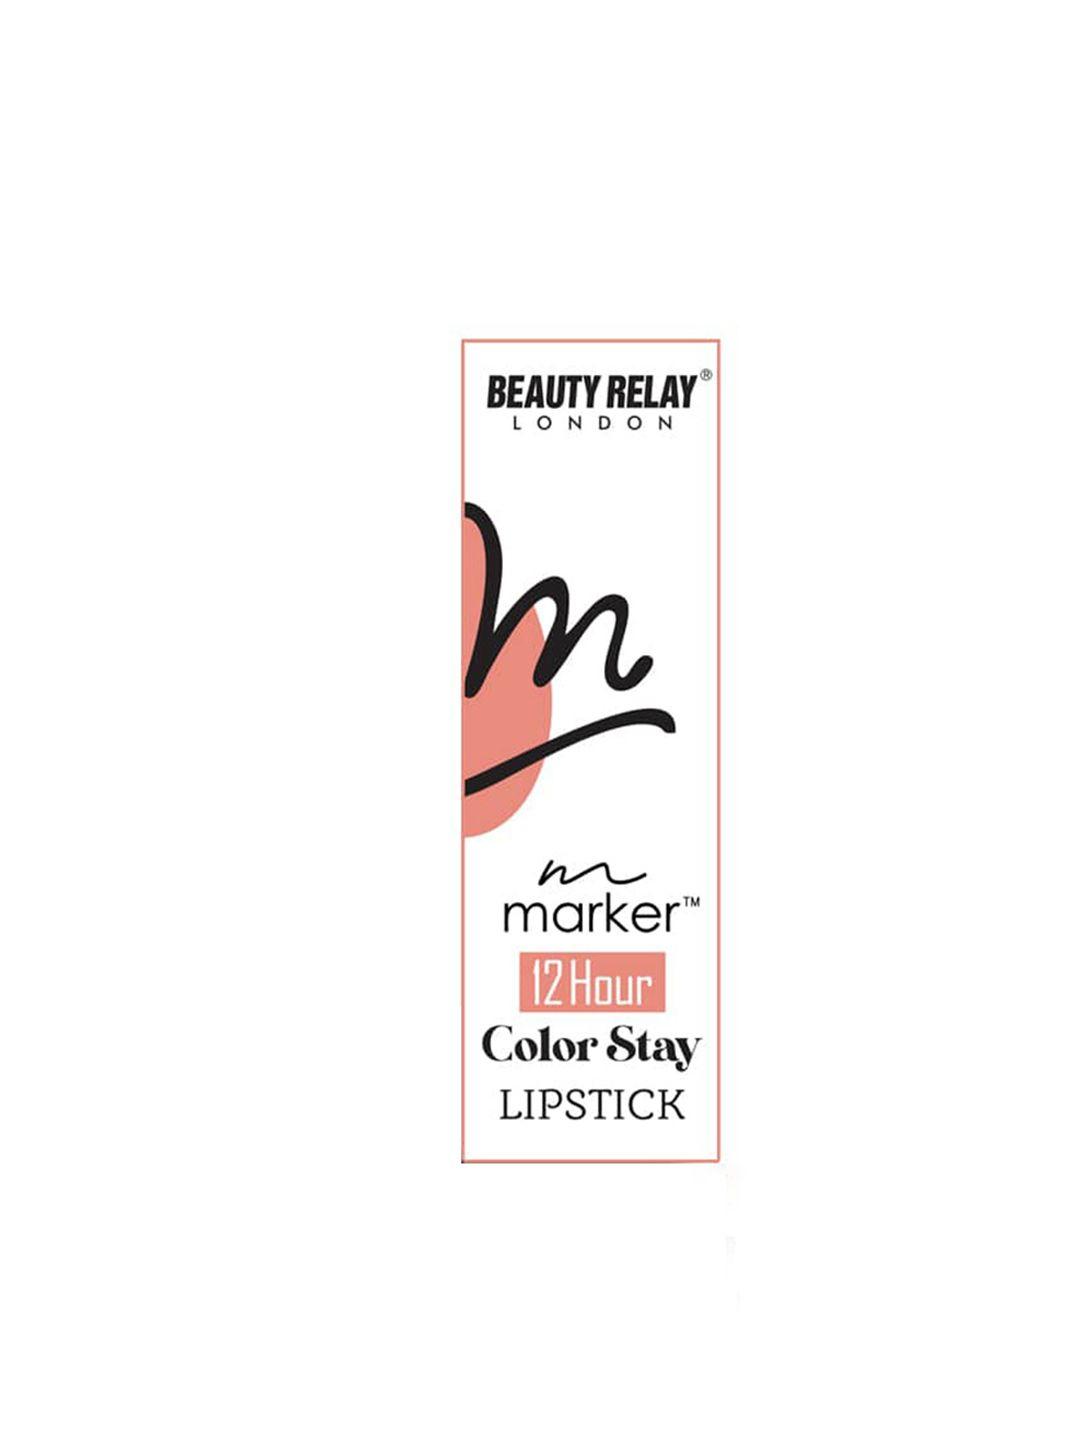 beautyrelay london 12 hour color stay lipstick with vitamin c 3.5g - mauve pink